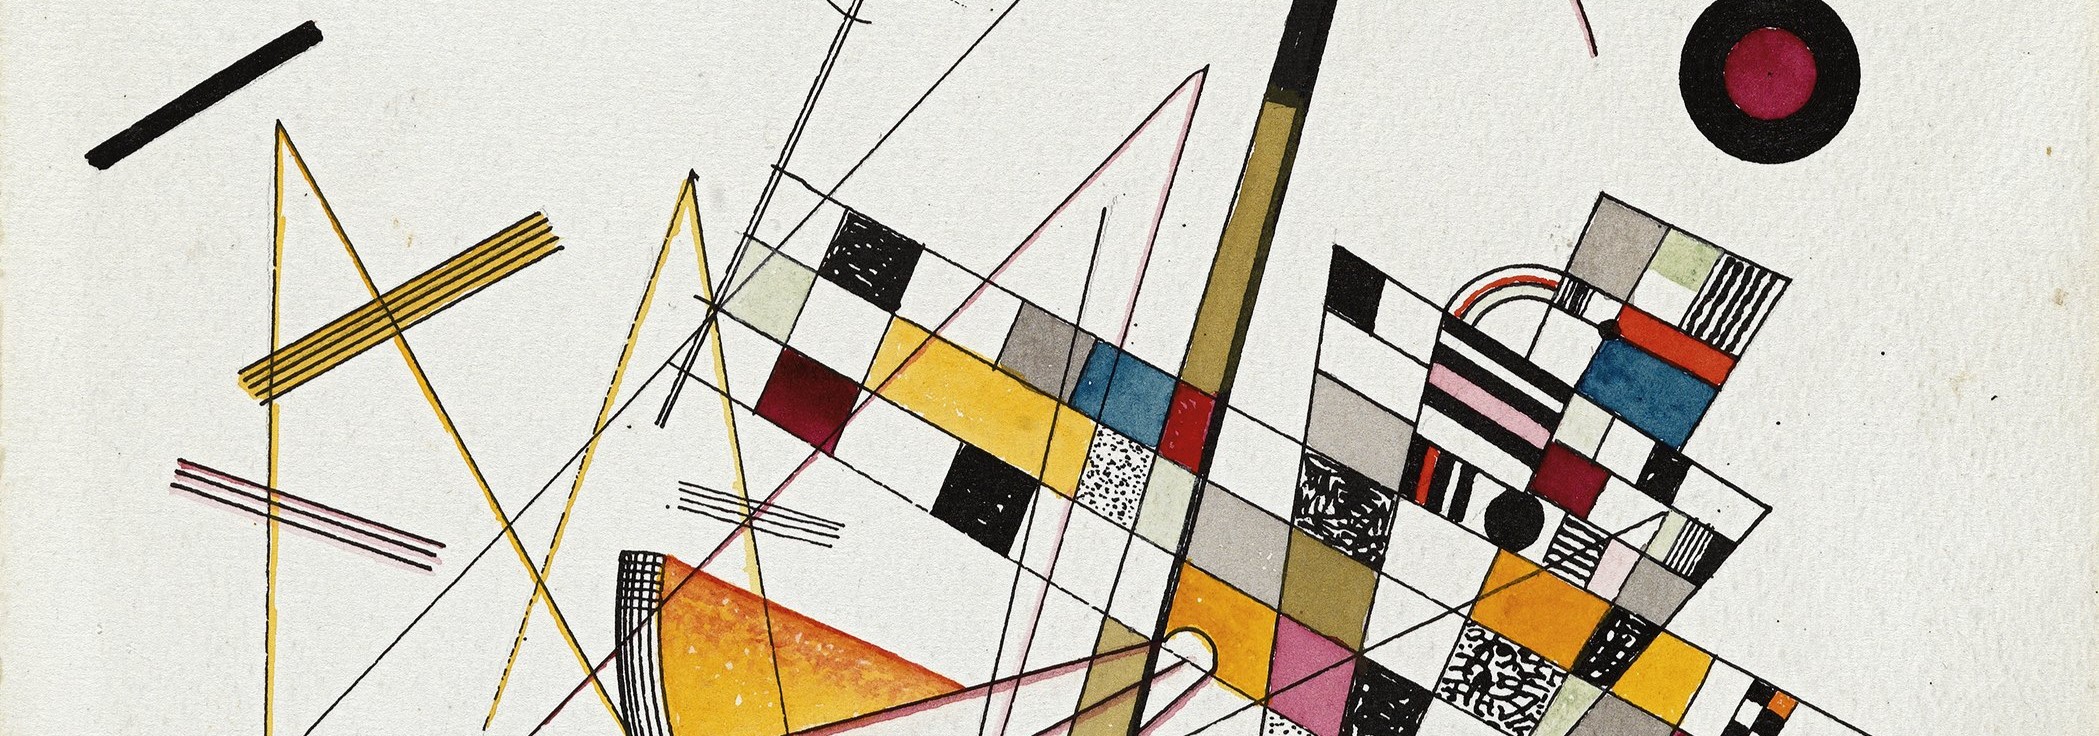 The site header, cropped from Delicate Tension no. 85 by Wassily Kandinsky